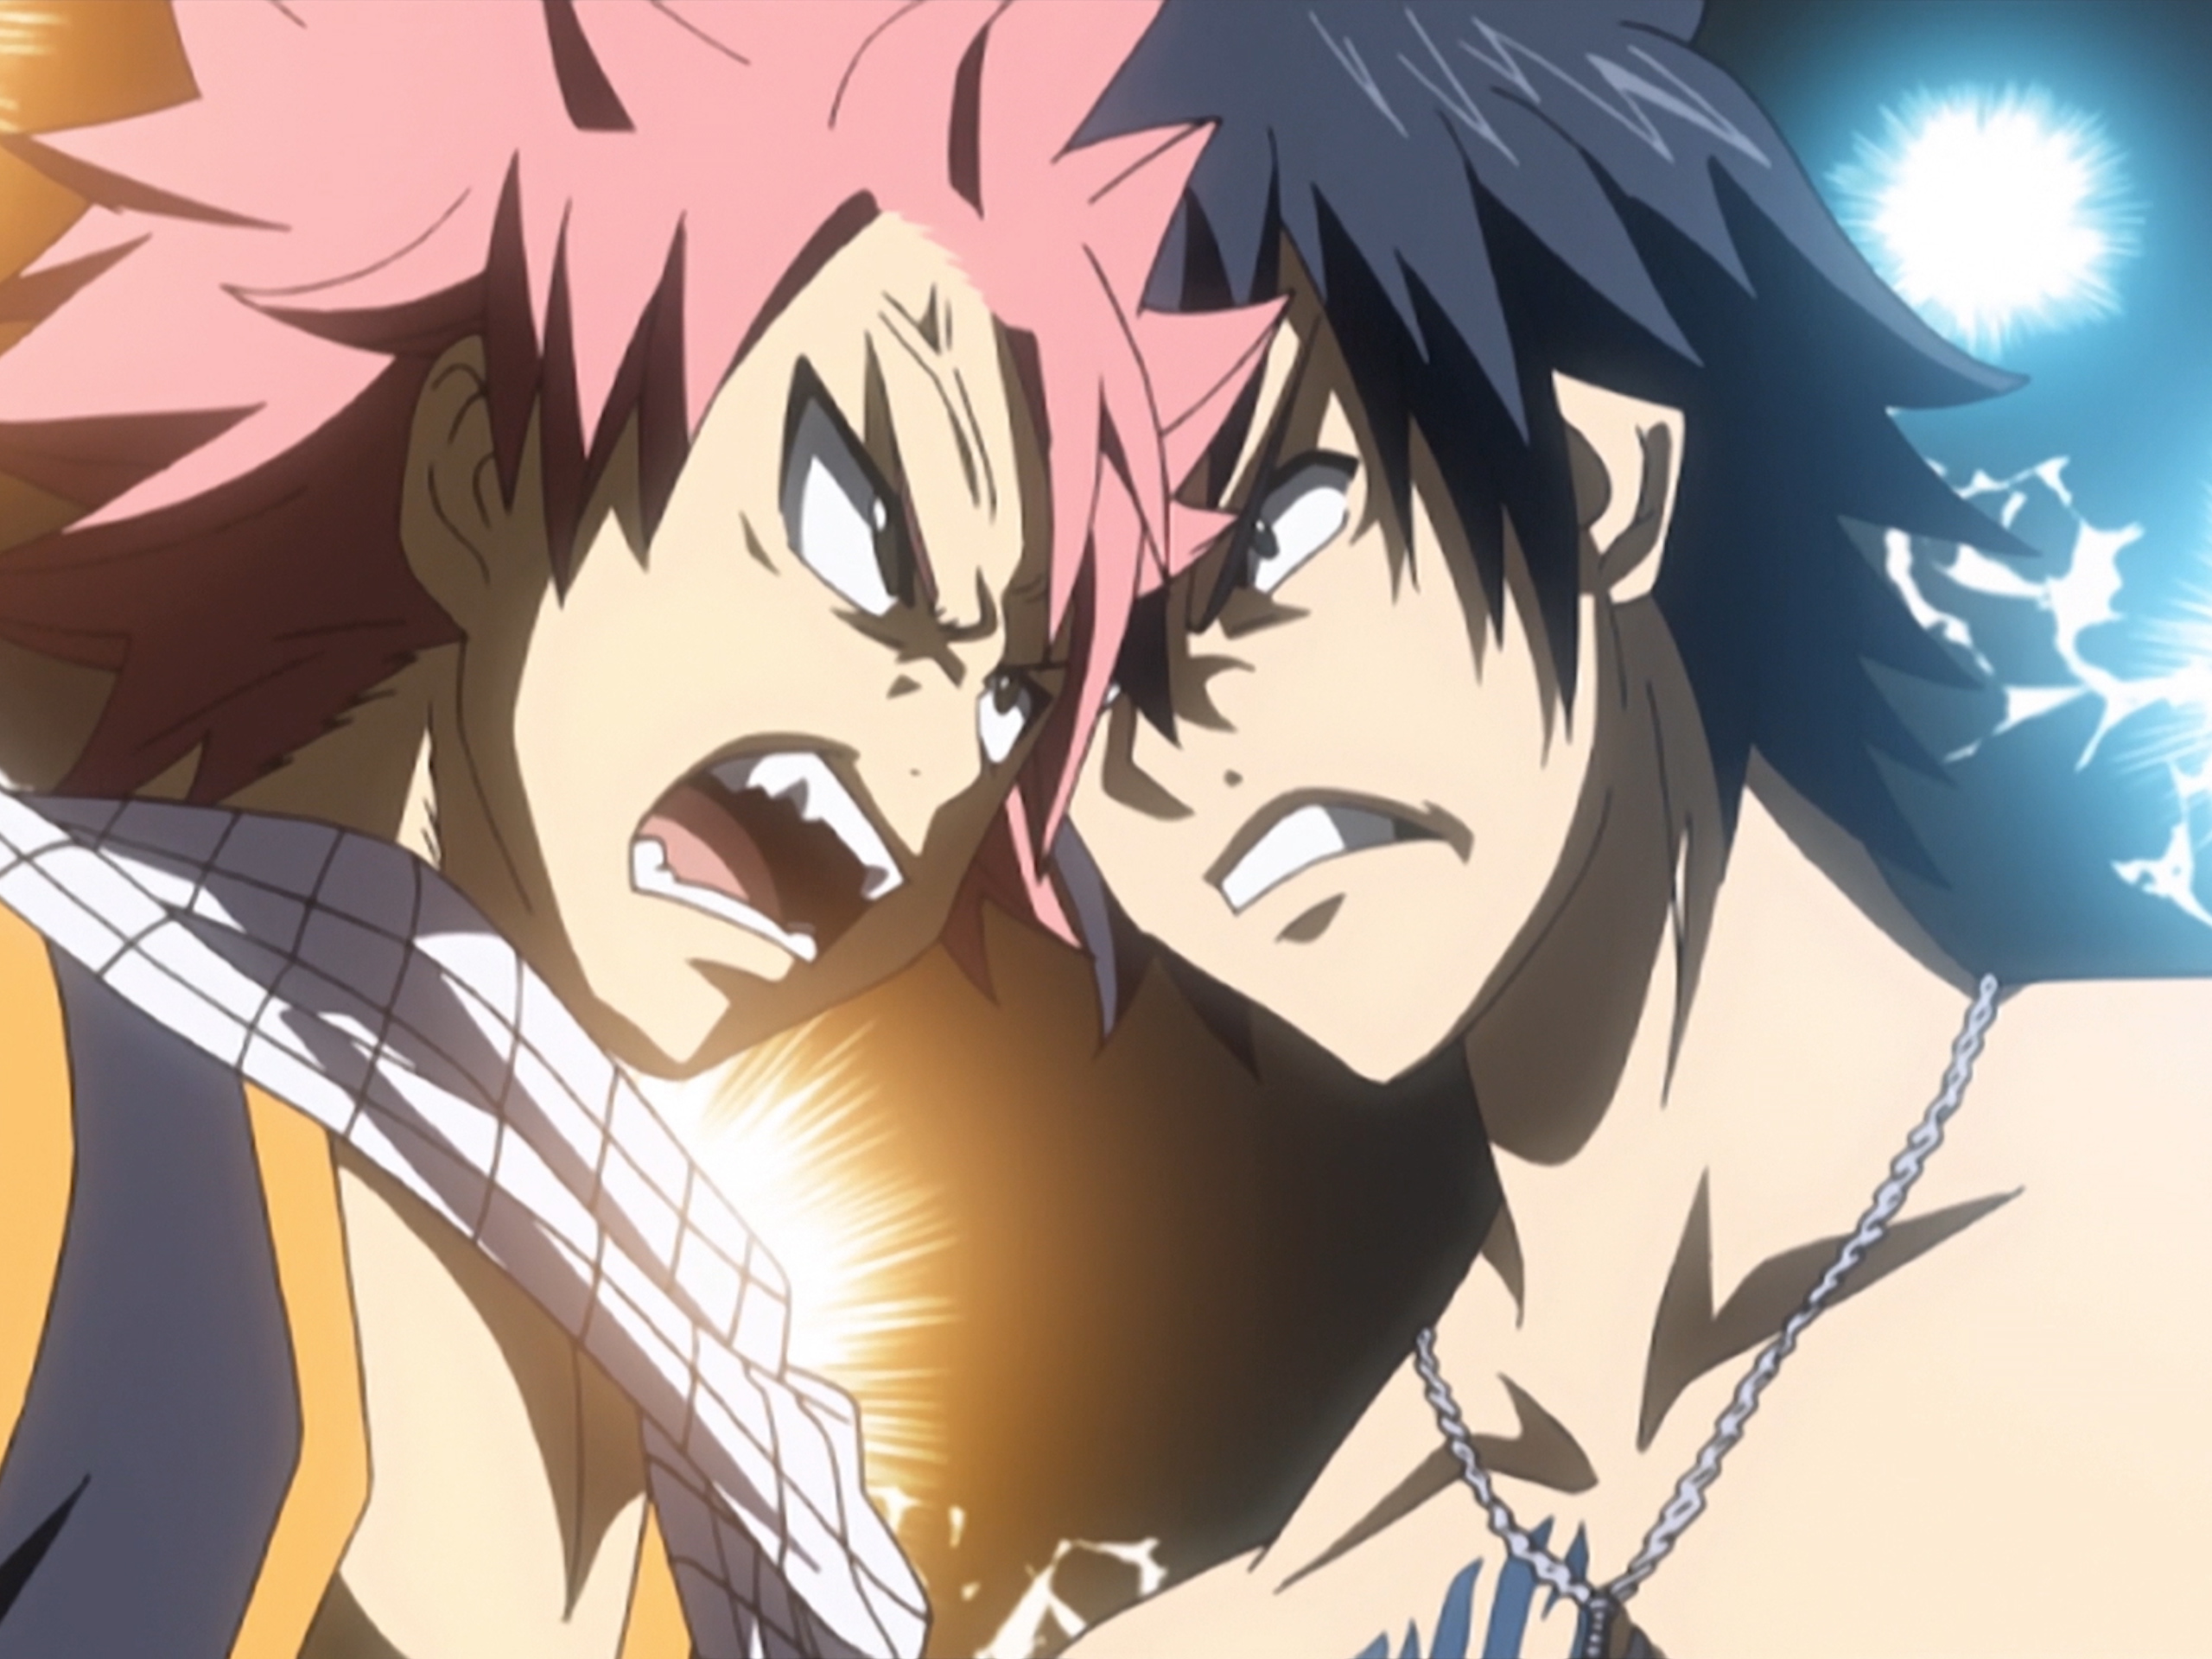 chris uhles recommends Fairy Tail Episode 8